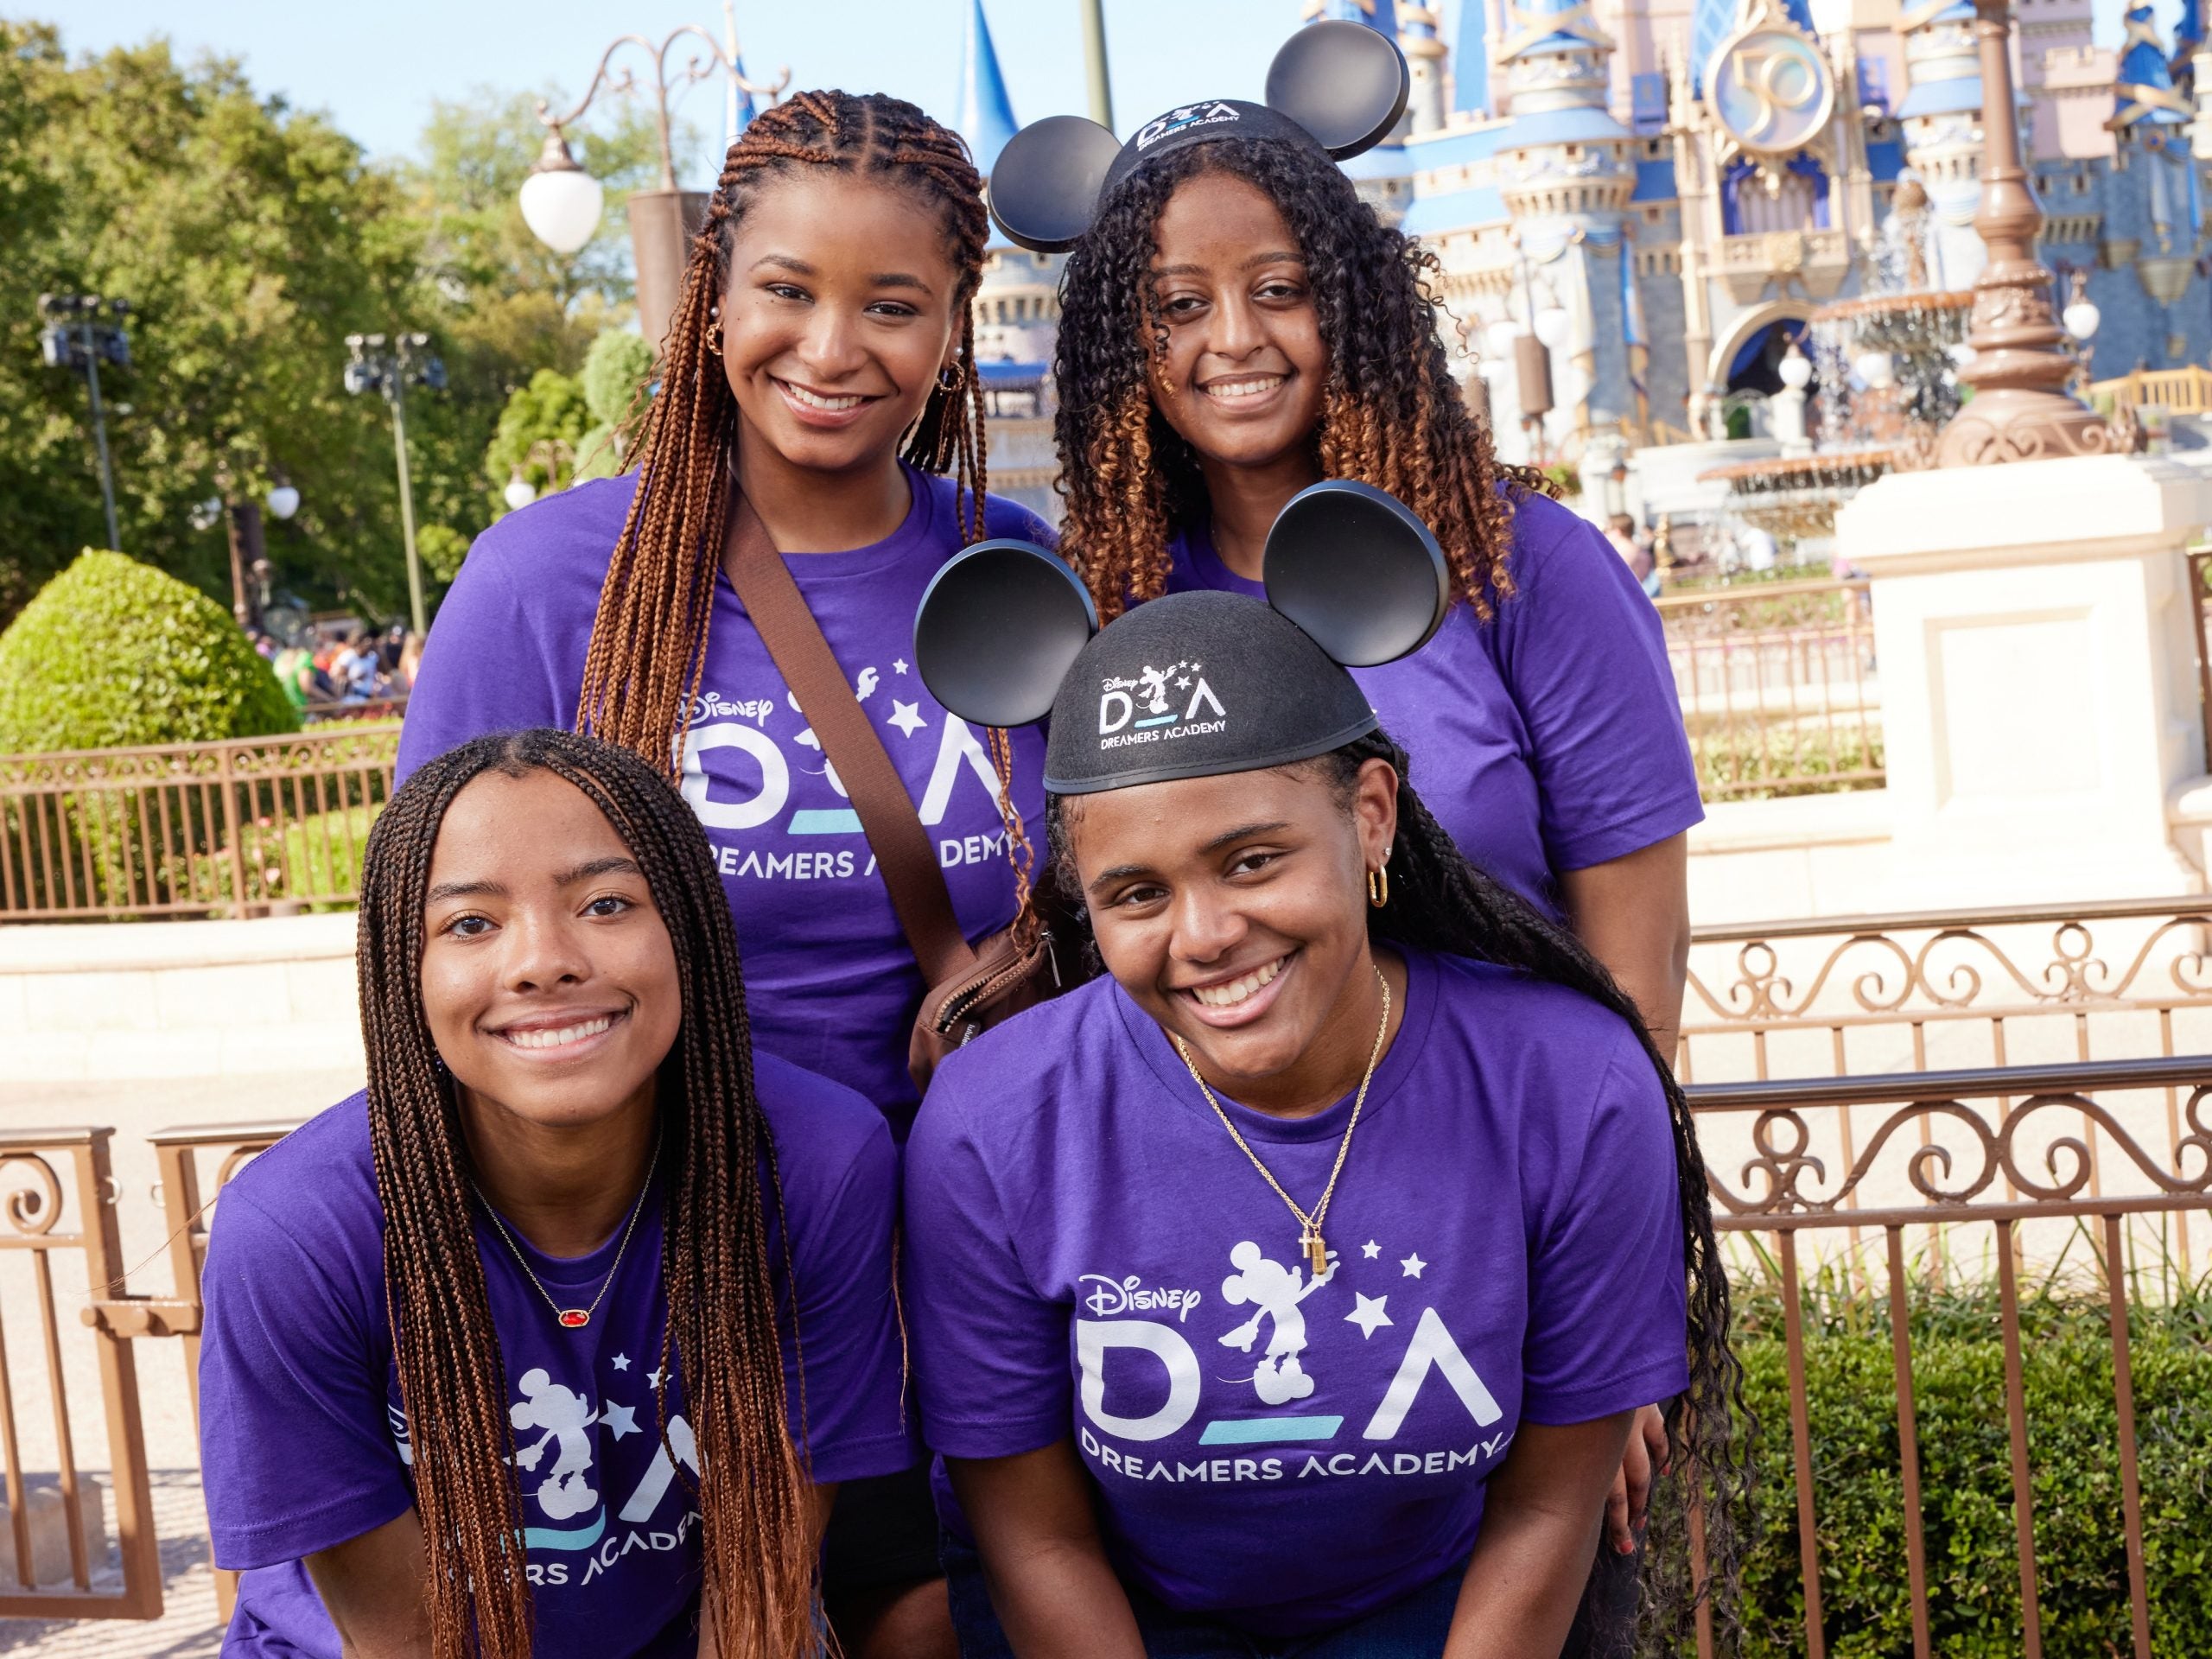 ‘It All Begins With Imagination’: Inside The Disney Dreamers Academy